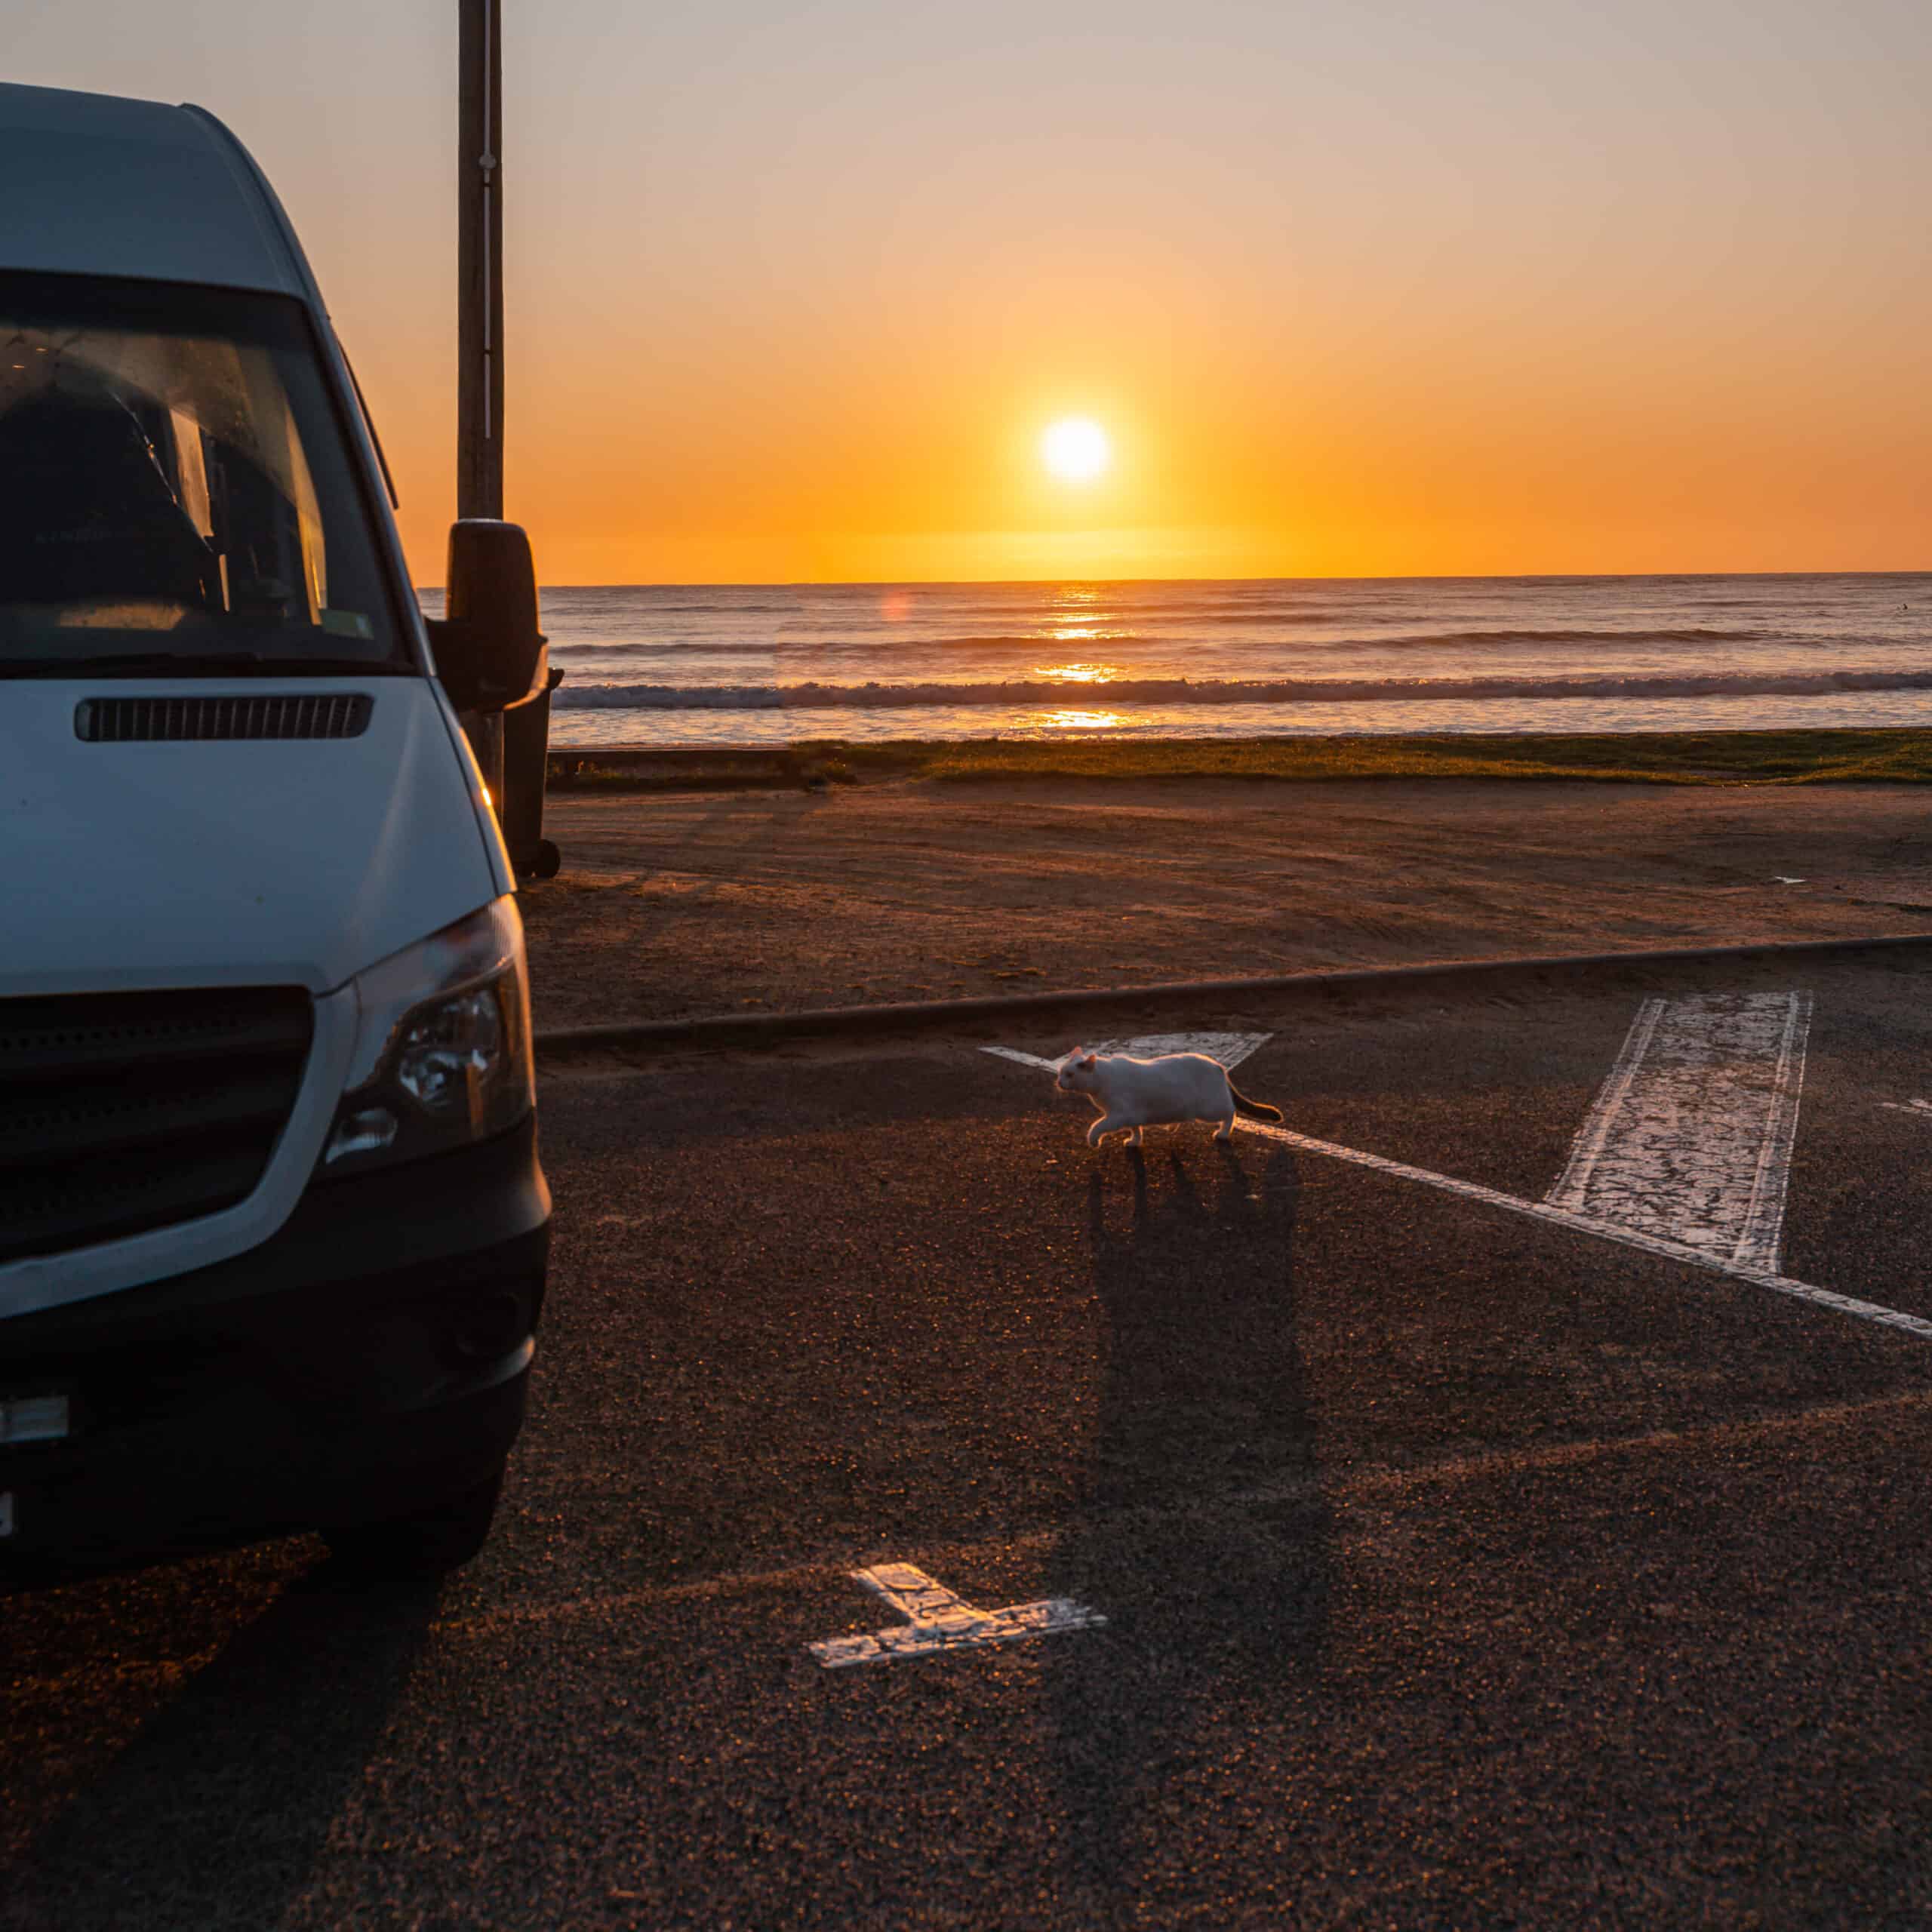 A van parked by the beach in Lorne during sunset